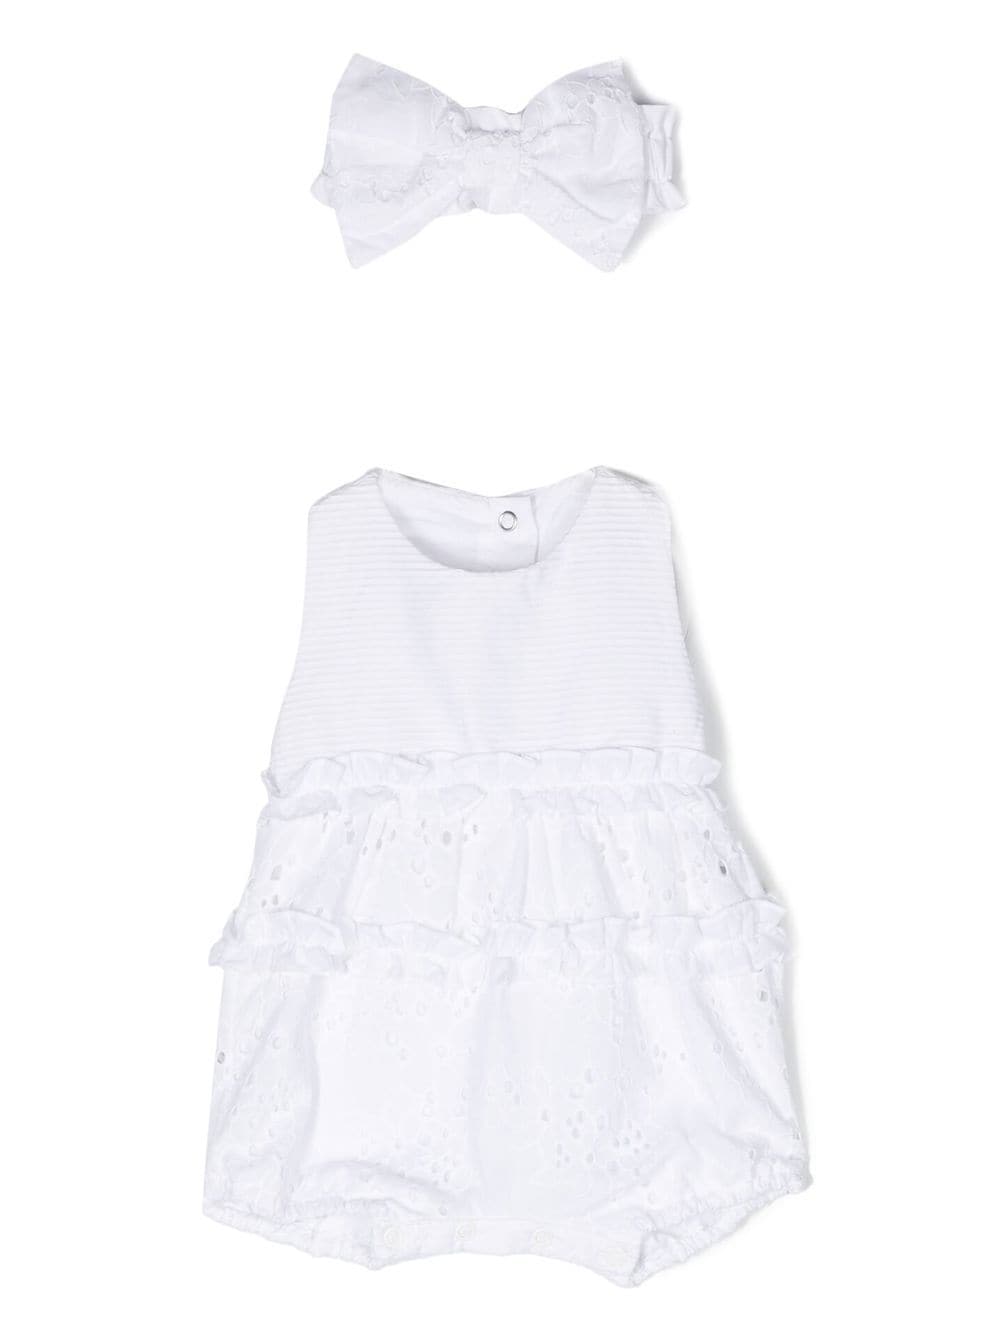 Lapin House broderie-anglaise cotton romper set - White von Lapin House